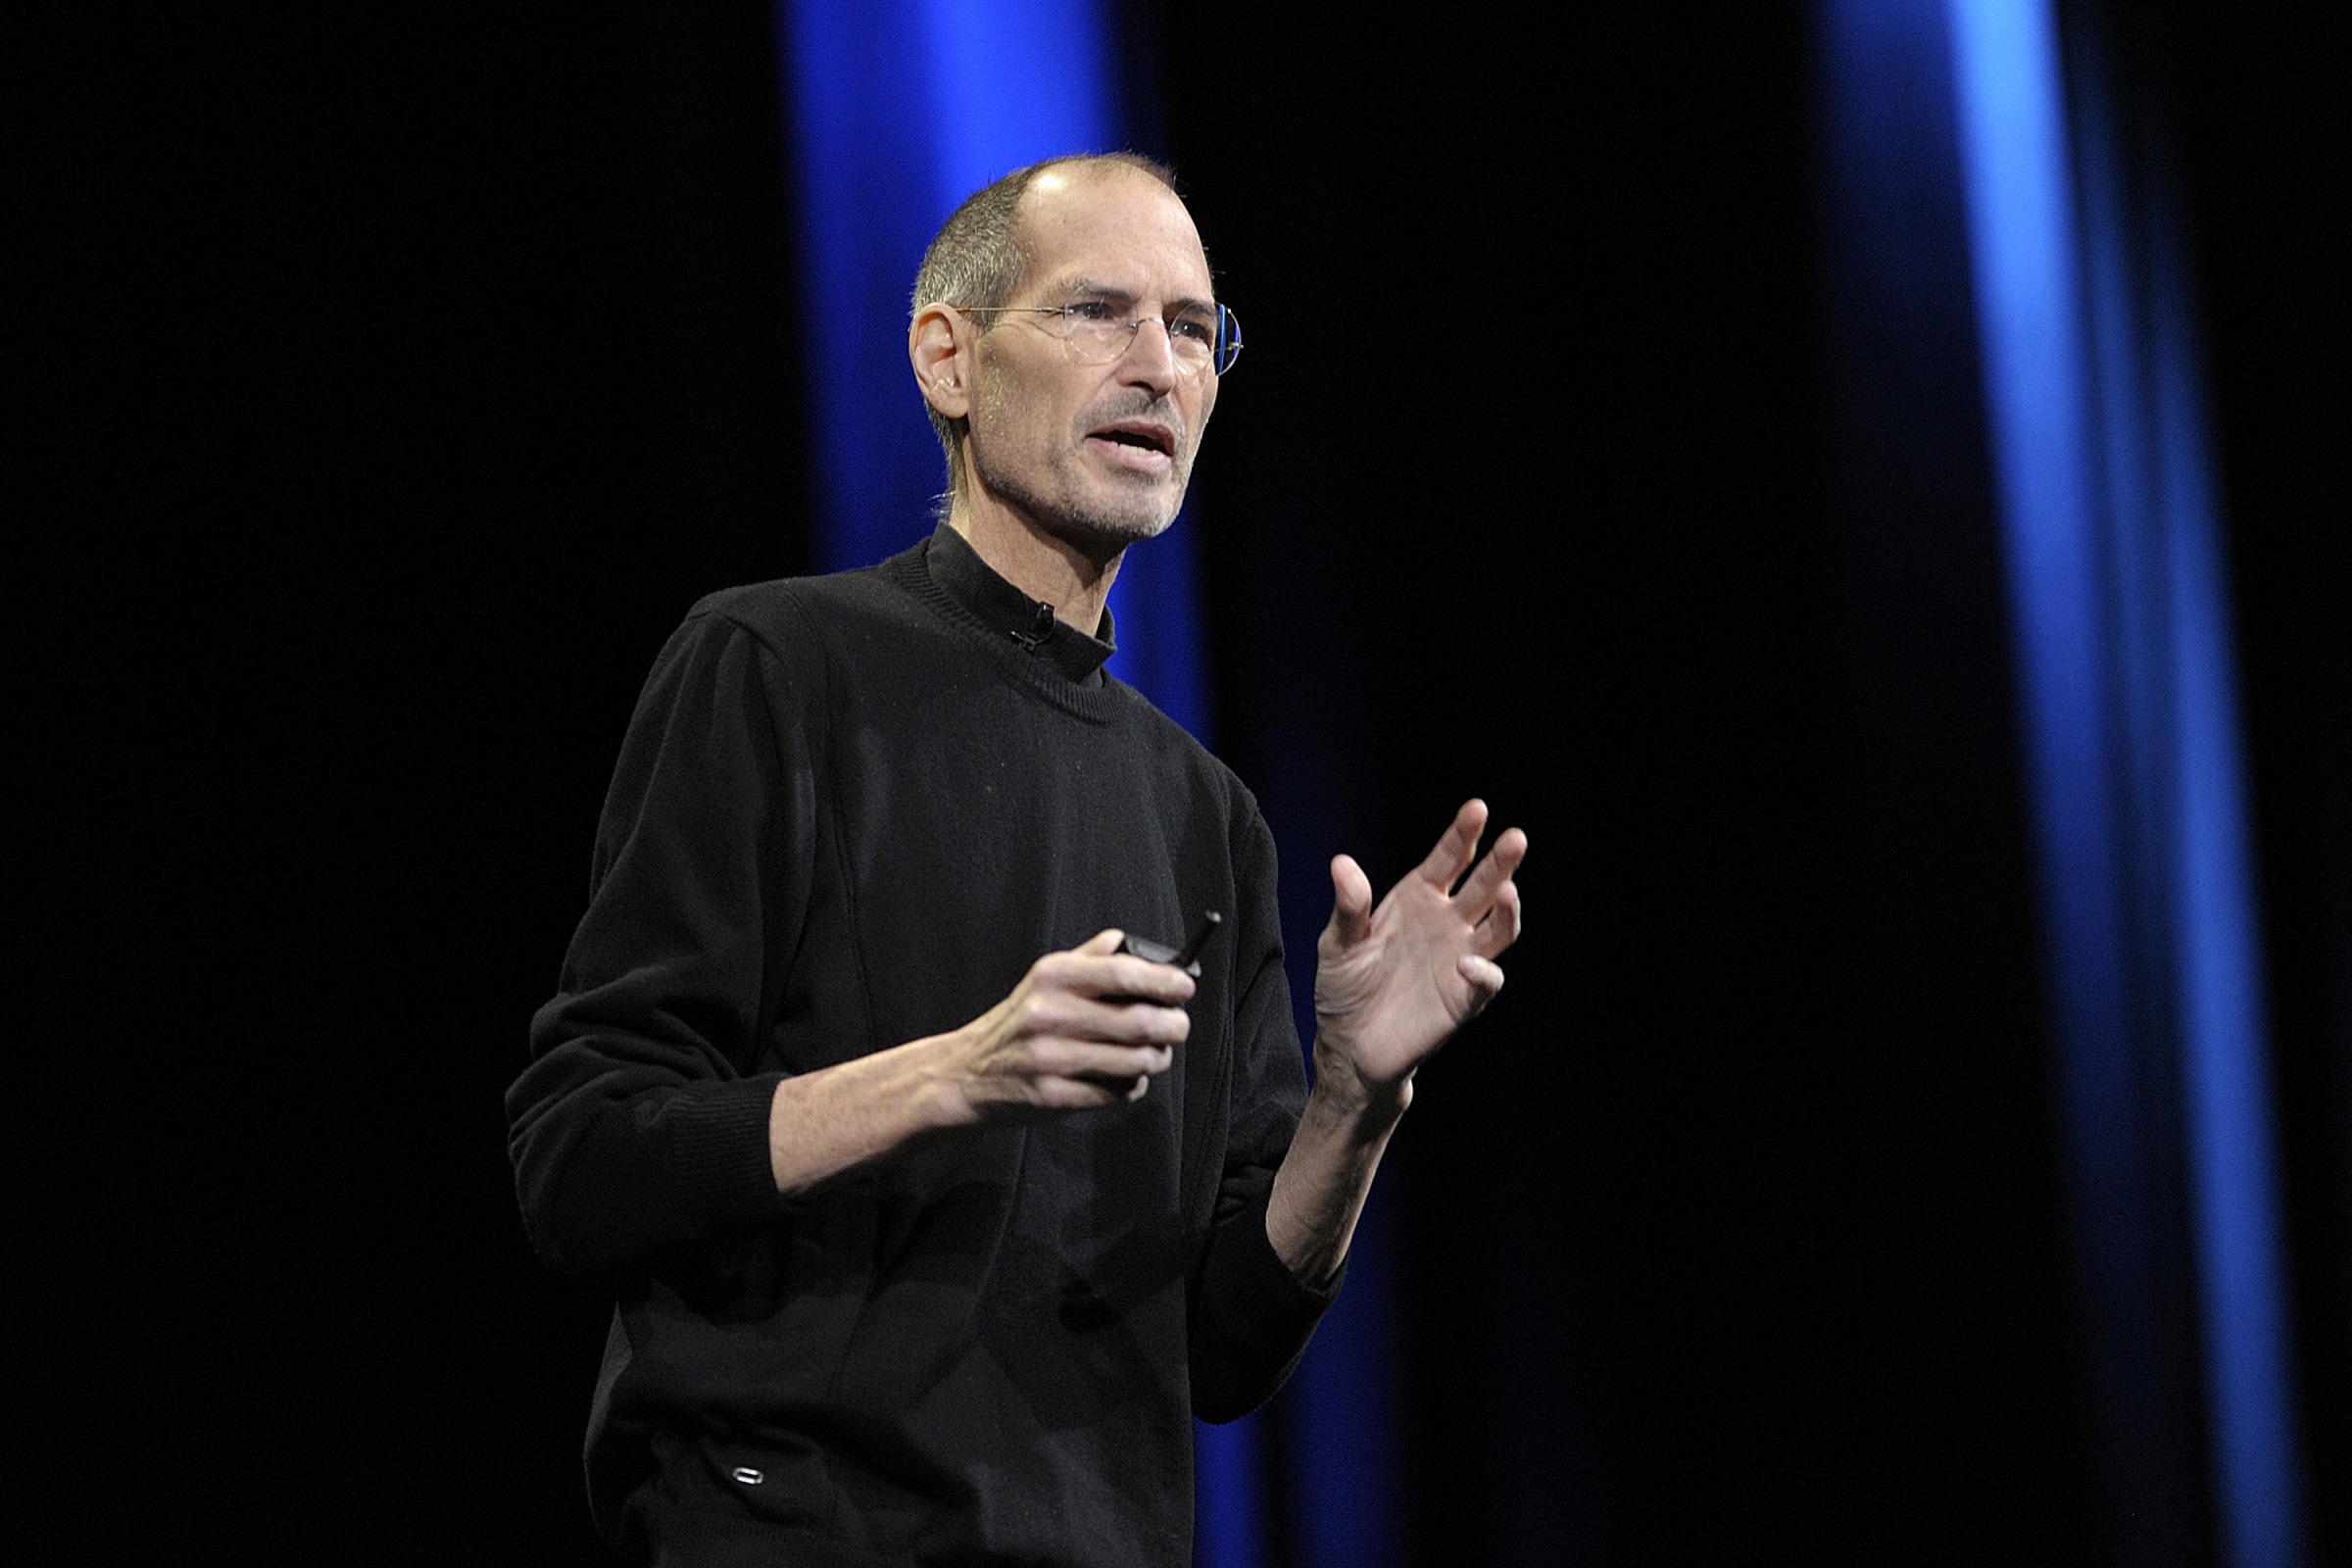 Steve Jobs at the Apple Worldwide Developers Conference 2011.